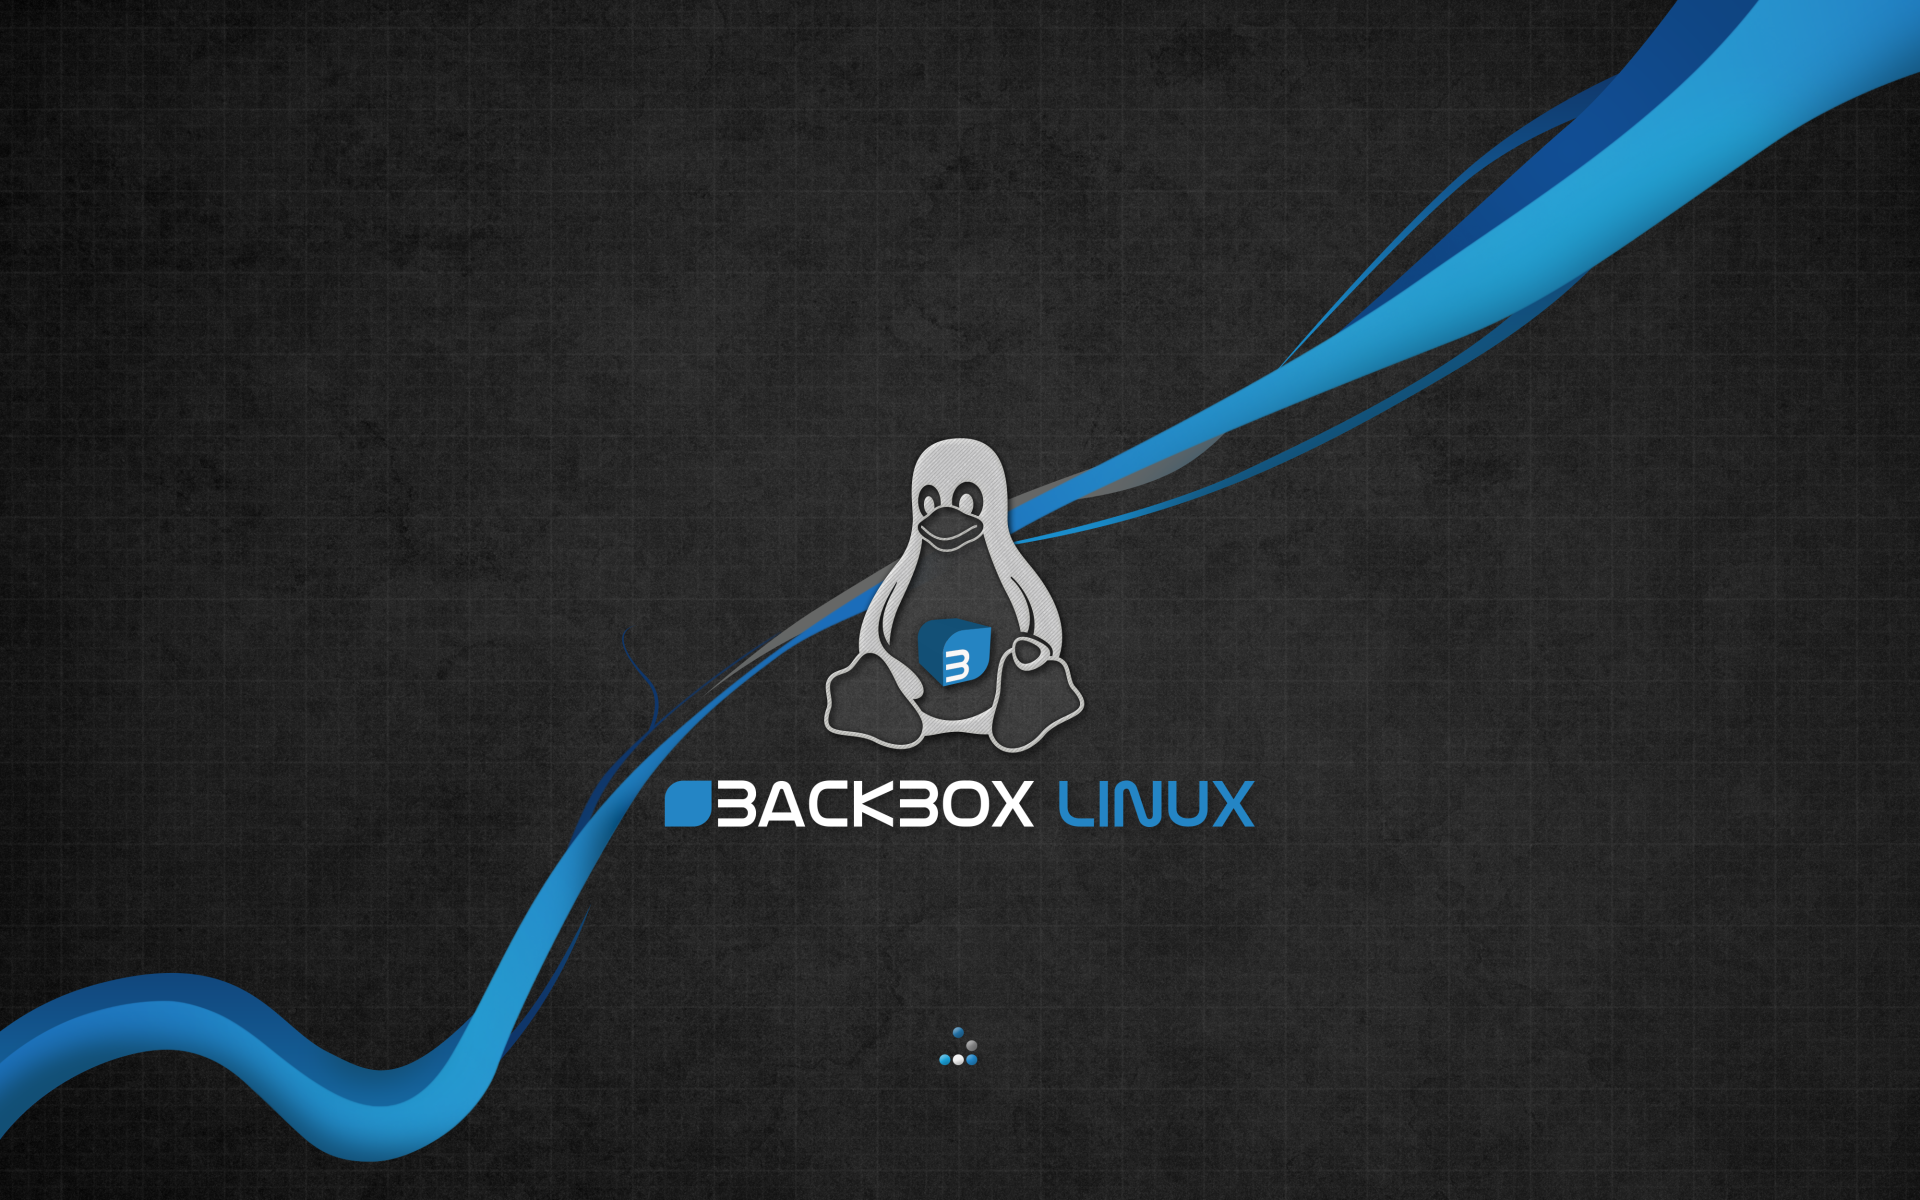 100+ HD 4K Linux Wallpapers 1440p For Desktop (2020) - Page 3 of 9 - We 7